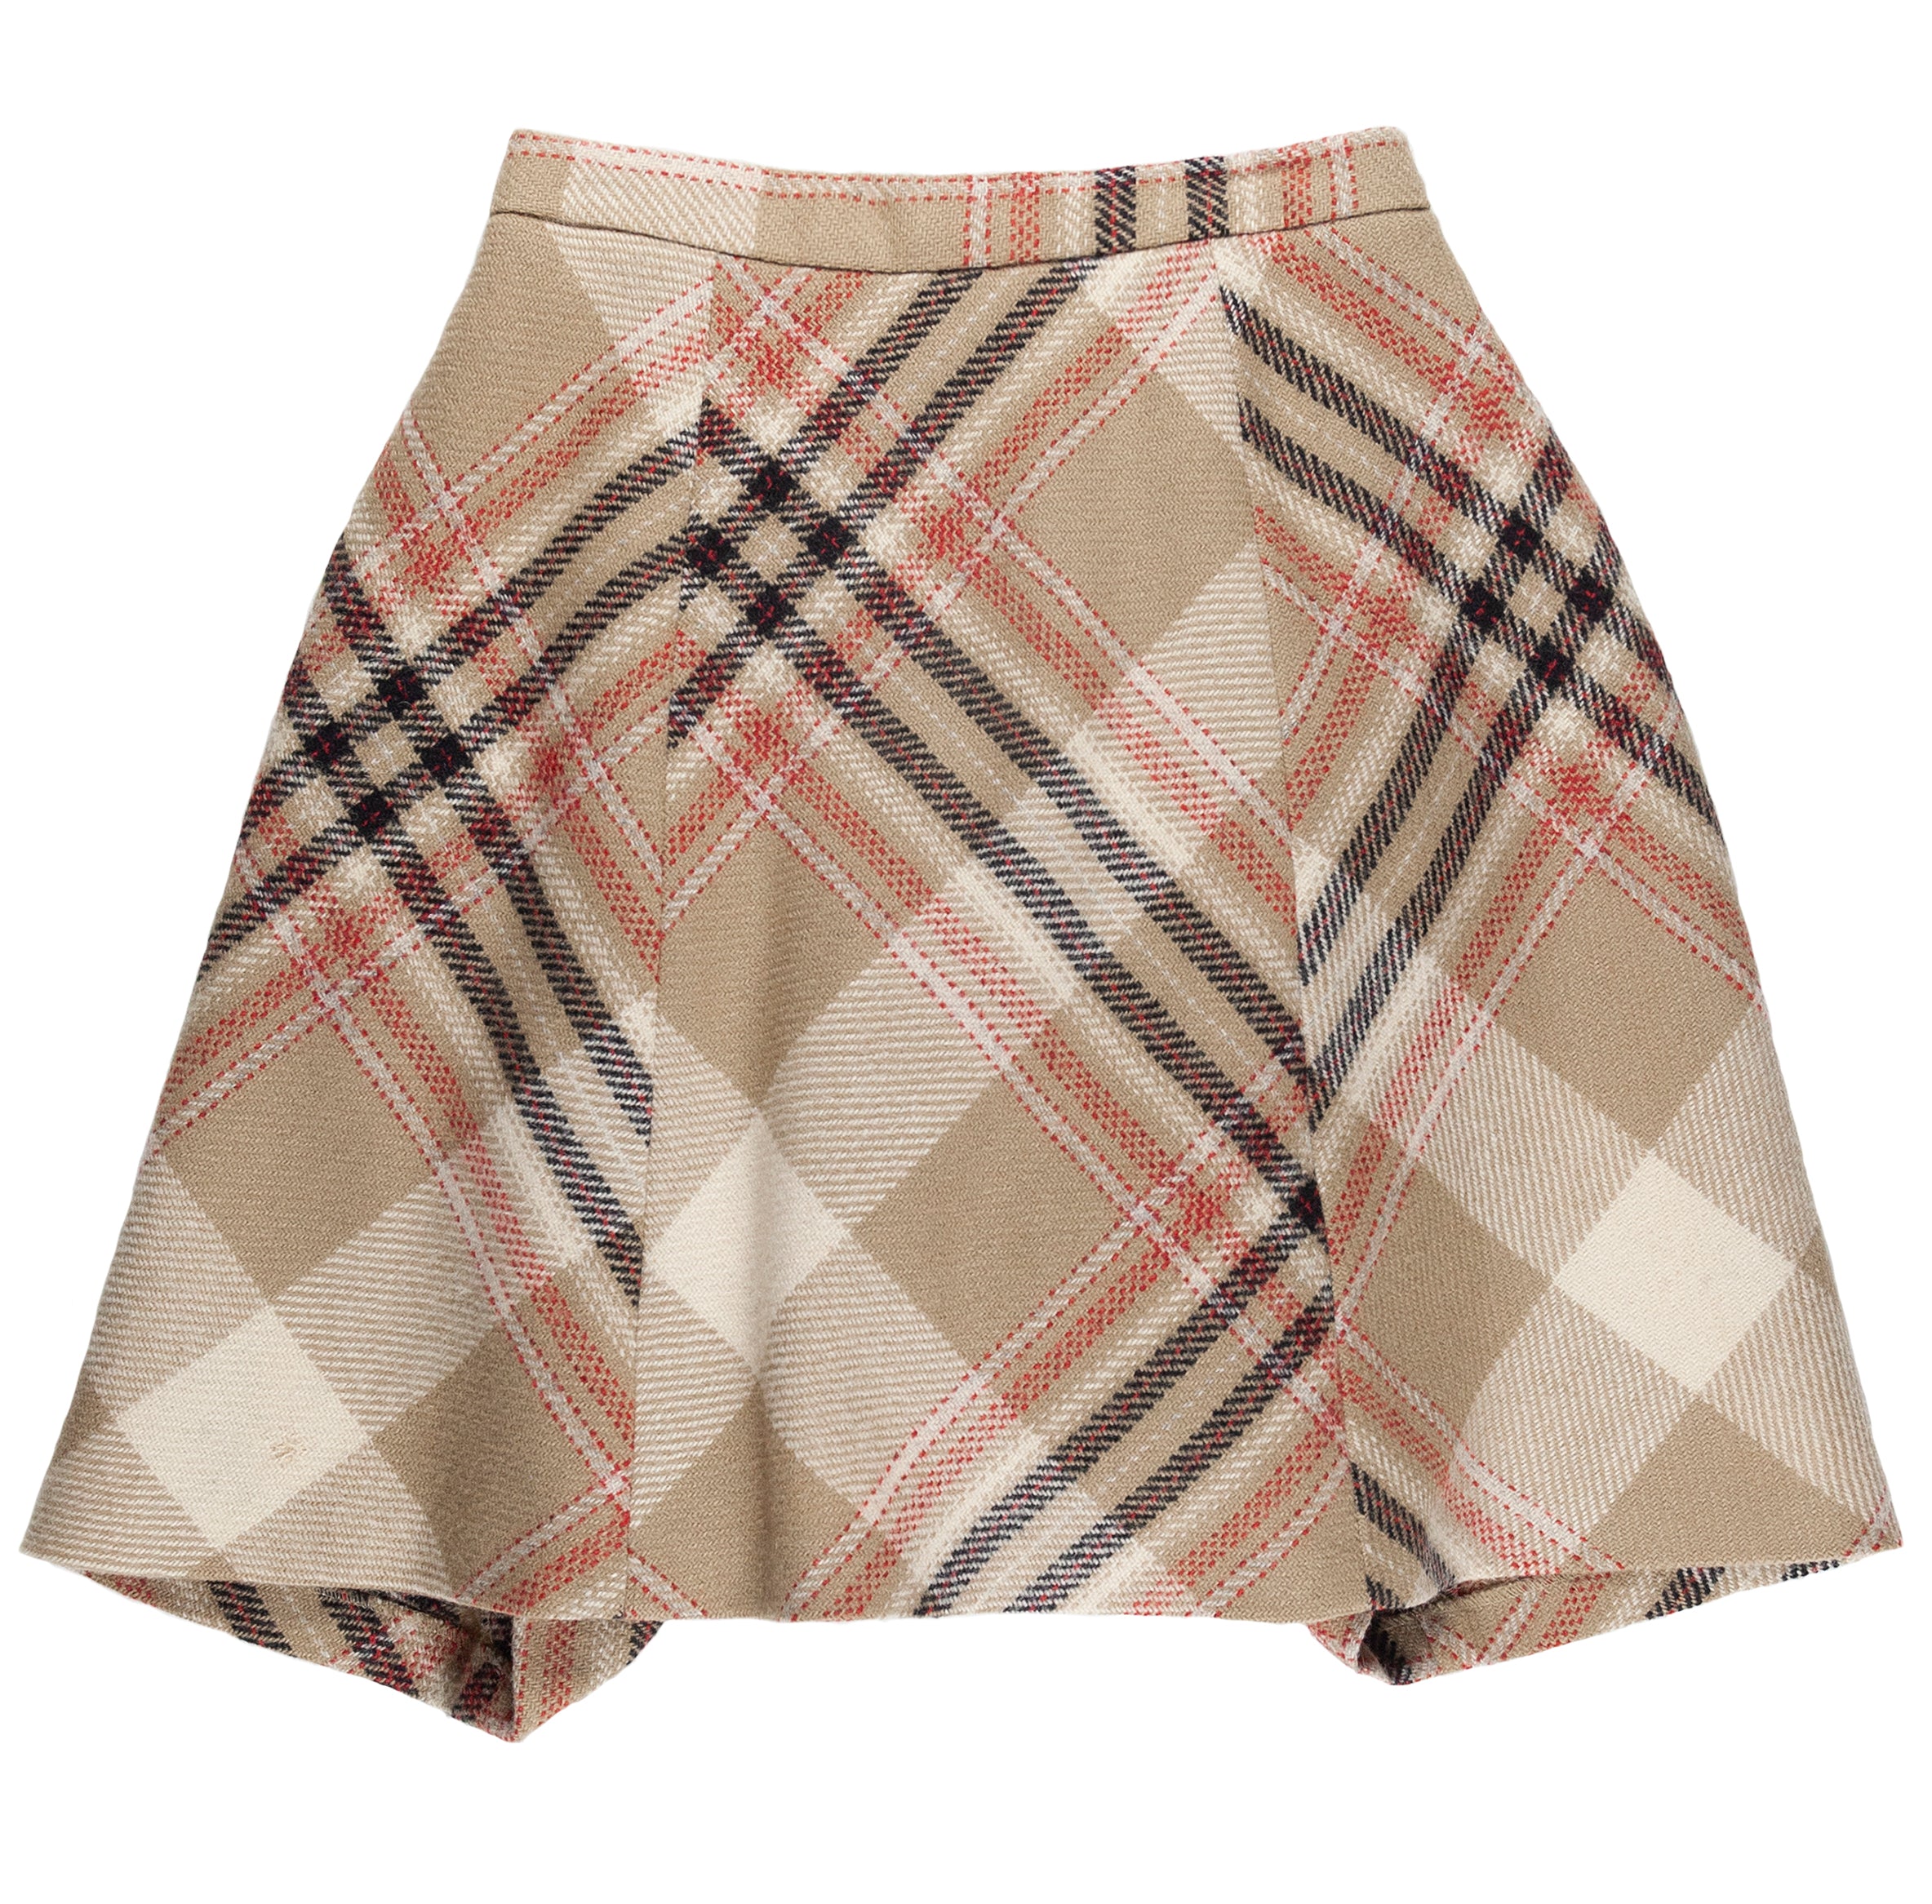 Vivienne Westwood Plaid Pleated Skirt - AW94 “On Liberty” - SILVER 